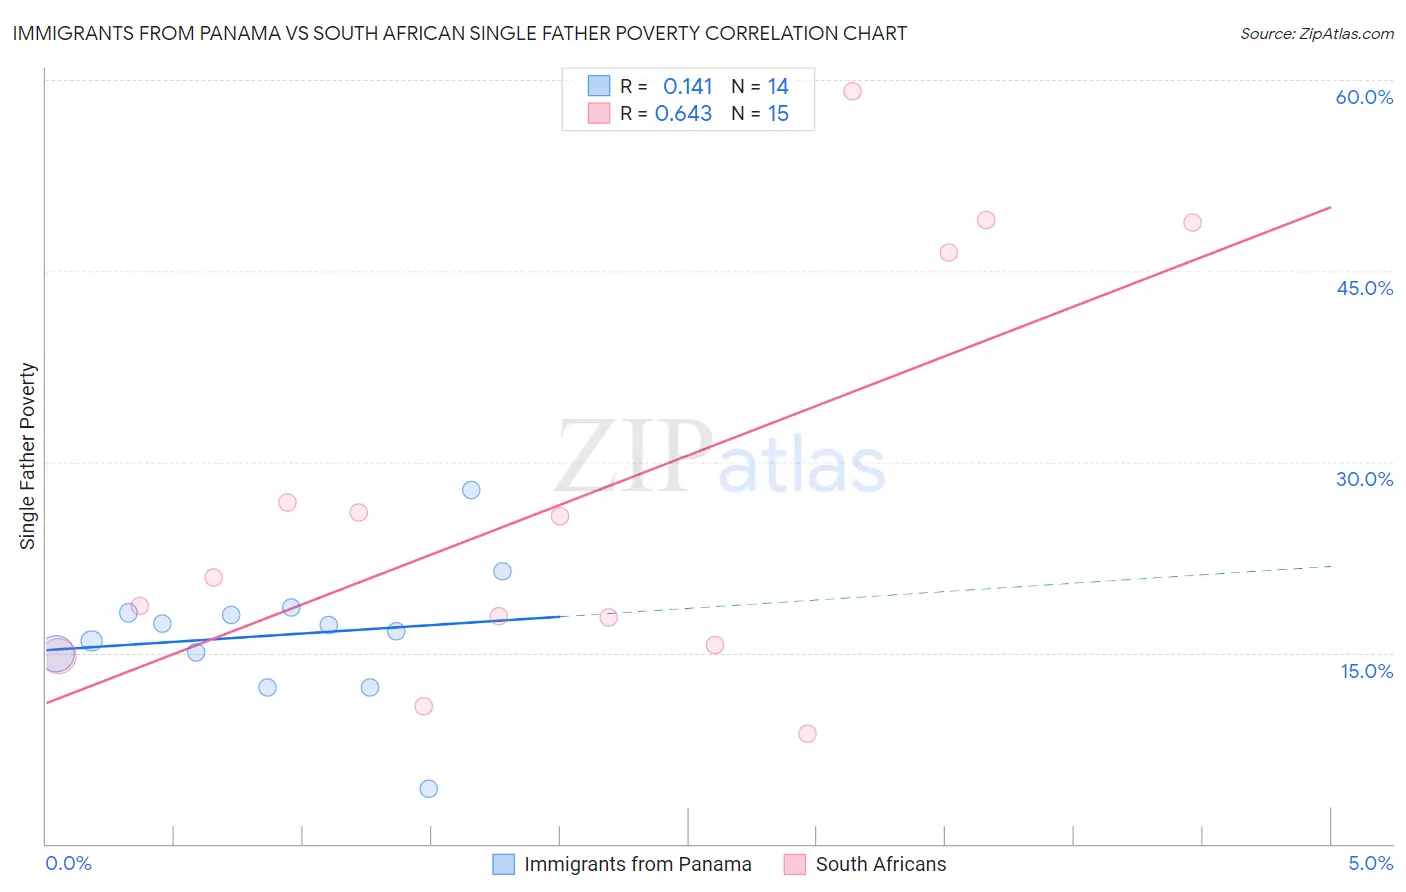 Immigrants from Panama vs South African Single Father Poverty